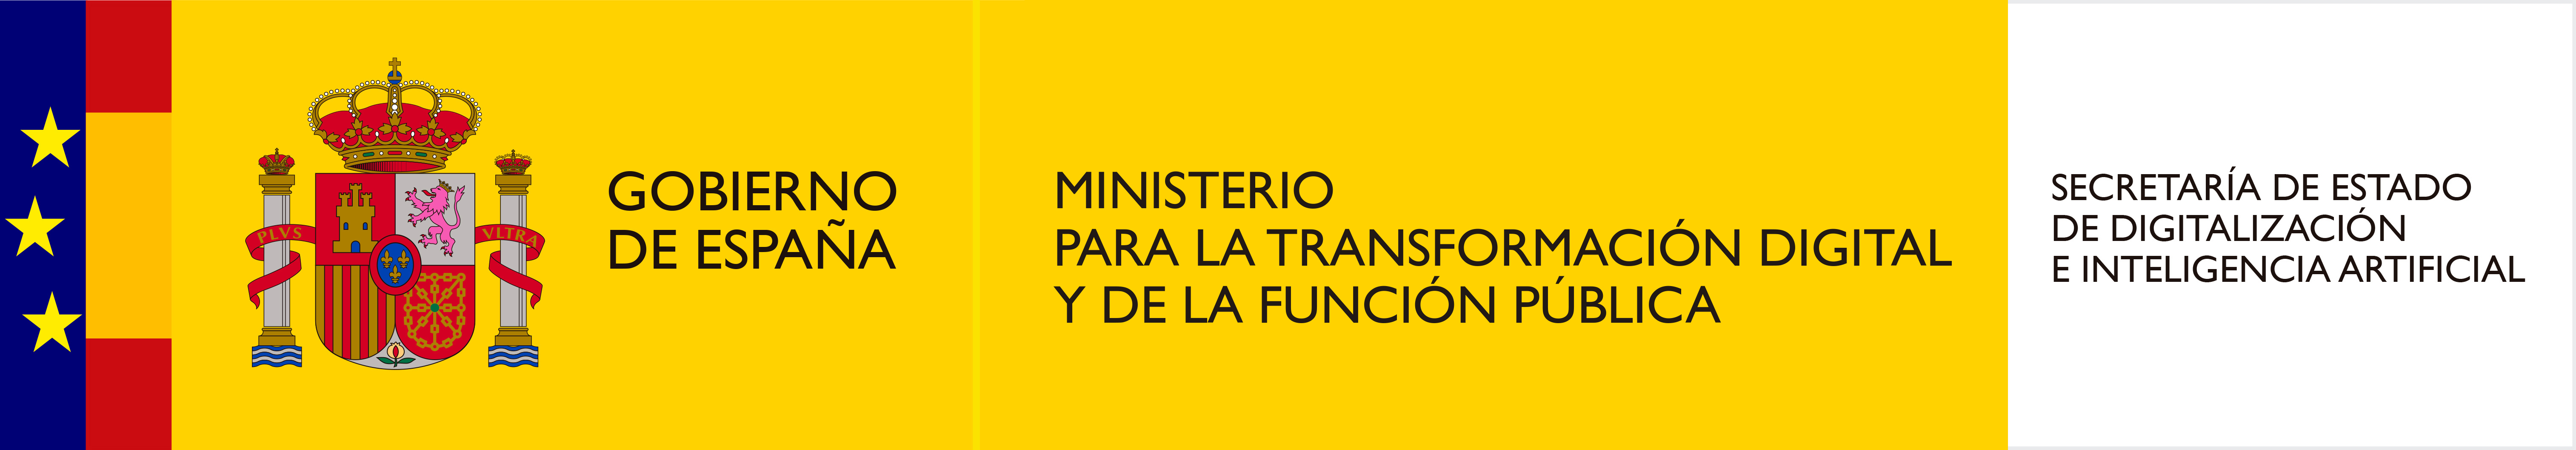 Government of Spain. Ministry for digital transformation and public service. Secretary of state for digitalization and artificial intelligence